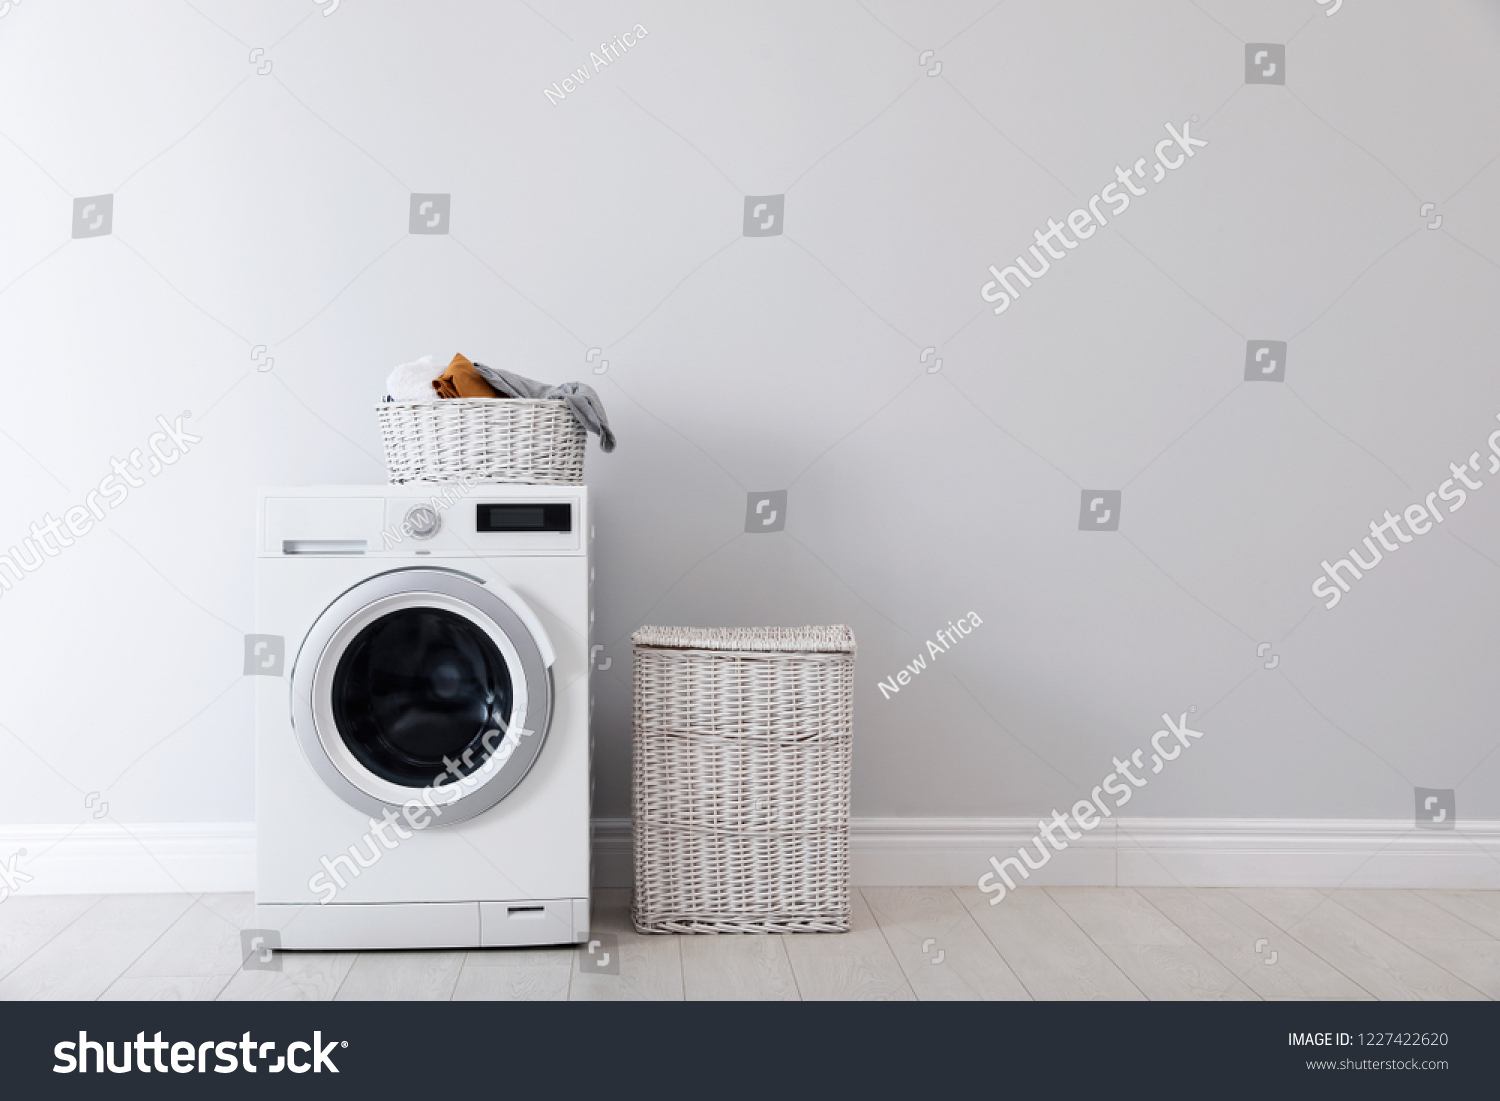 Washing machine with laundry and basket near wall. Space for text #1227422620